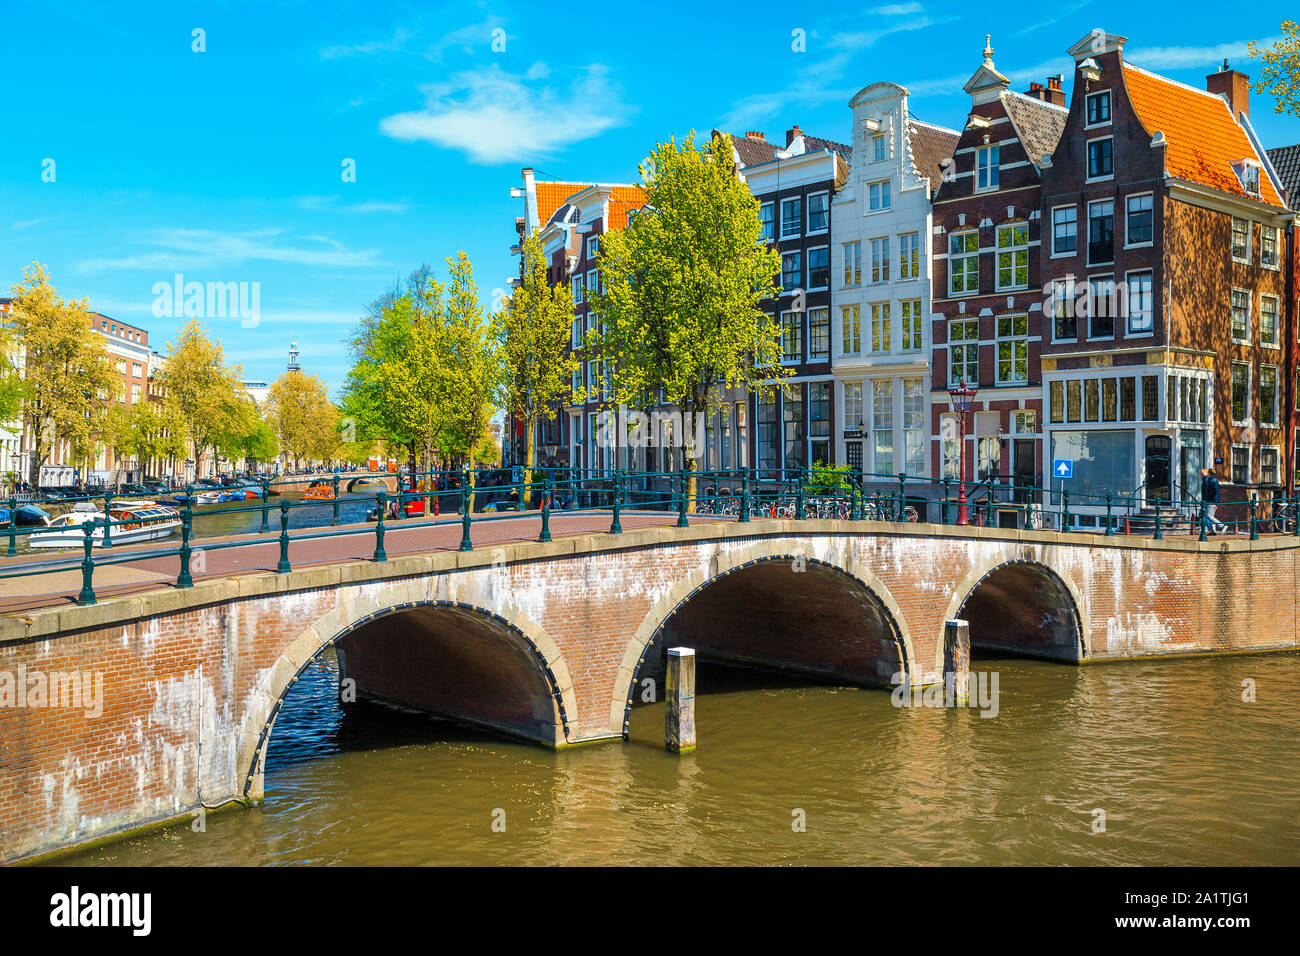 Picturesque travel and touristic location. Beautiful water canals and waterways with spectacular traditonal dutch buildings, Amsterdam, Netherlands, E Stock Photo